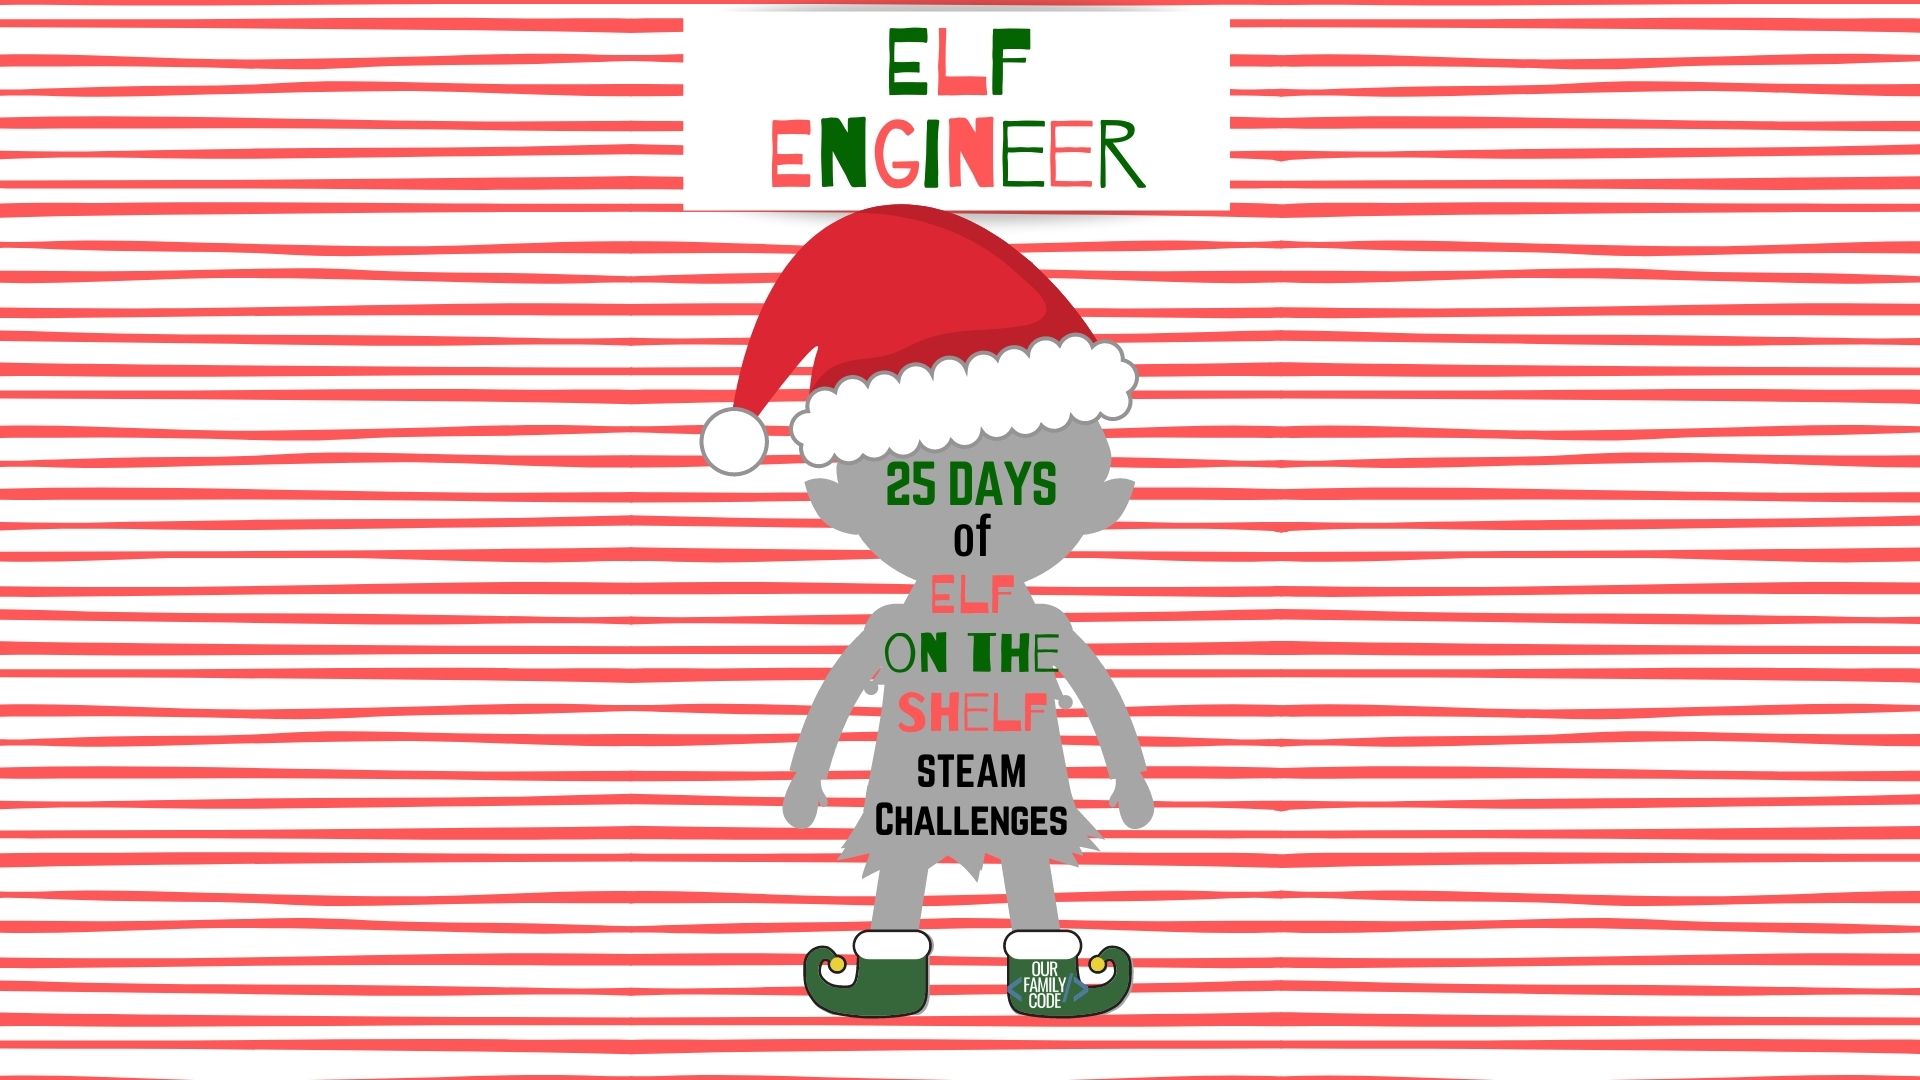 Become an Elf Engineer with these 25 Days of Elf on the Shelf STEAM challenges and free STEAM challenge cards! #STEAM #elfontheshelf #ChristmasSTEAM #STEM #STEMchallenges